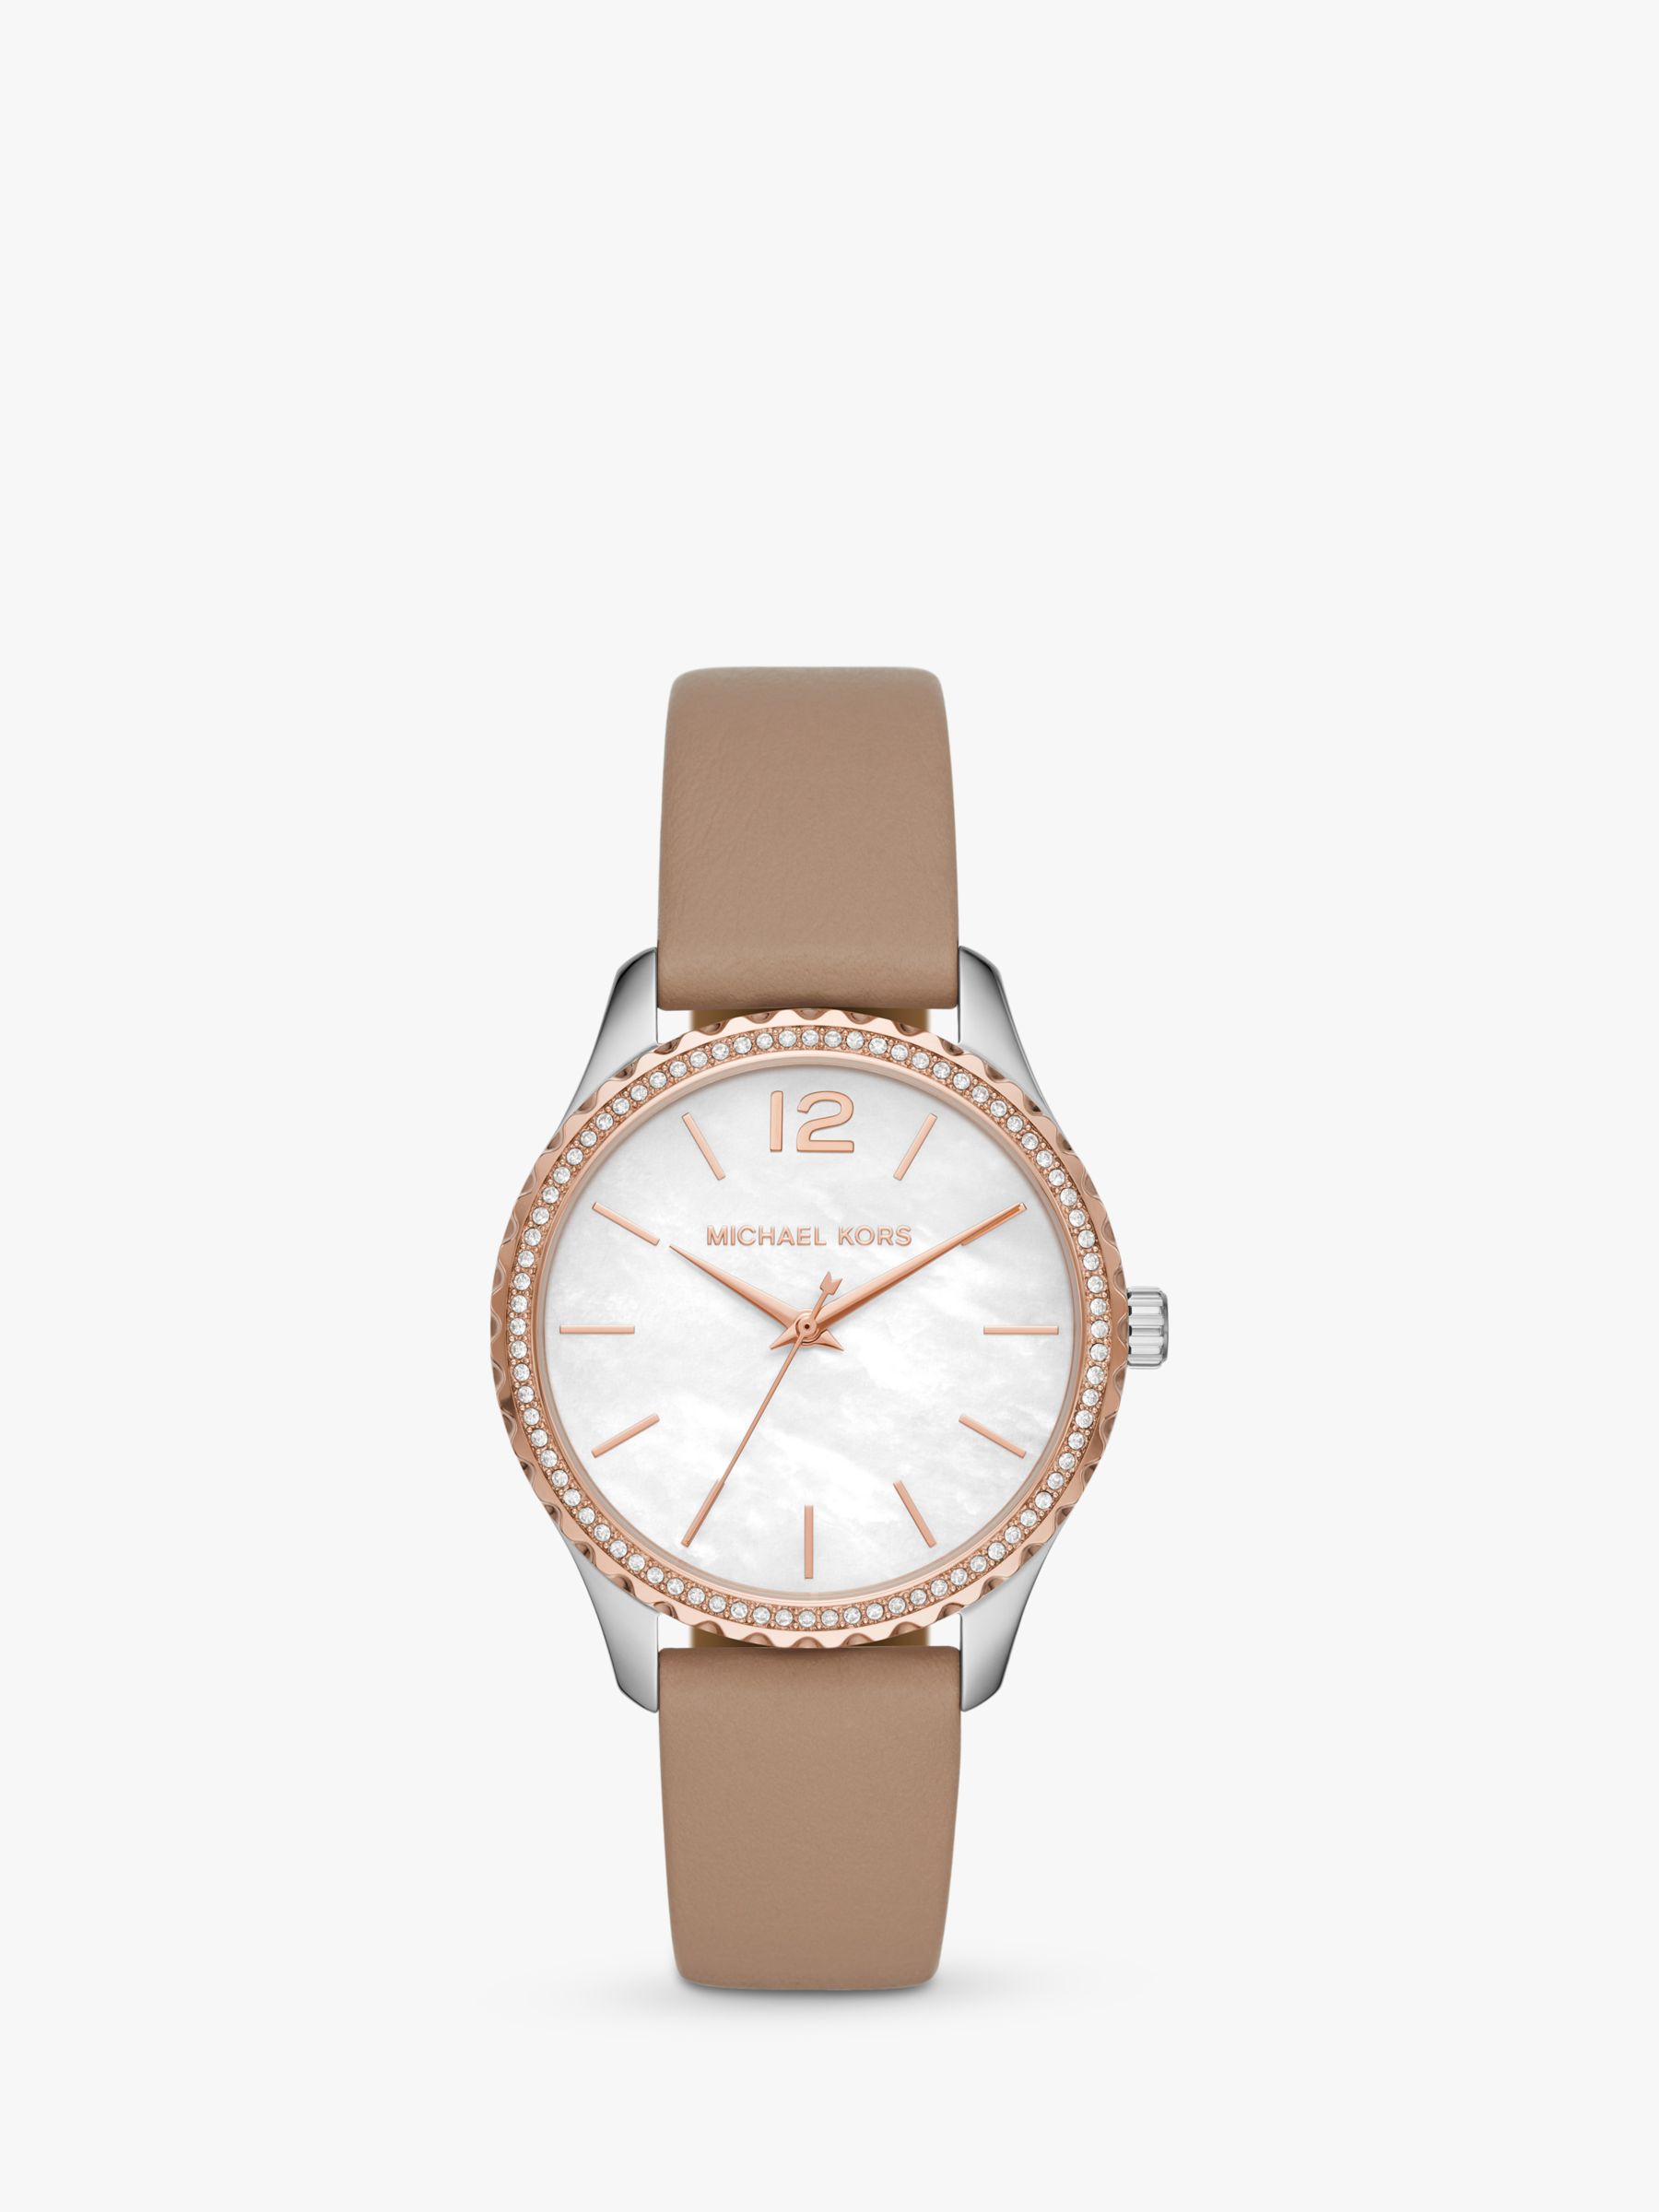 Michael Kors Women's Layton Crystal Leather Strap Watch, Truffle/Mother of  Pearl MK2910